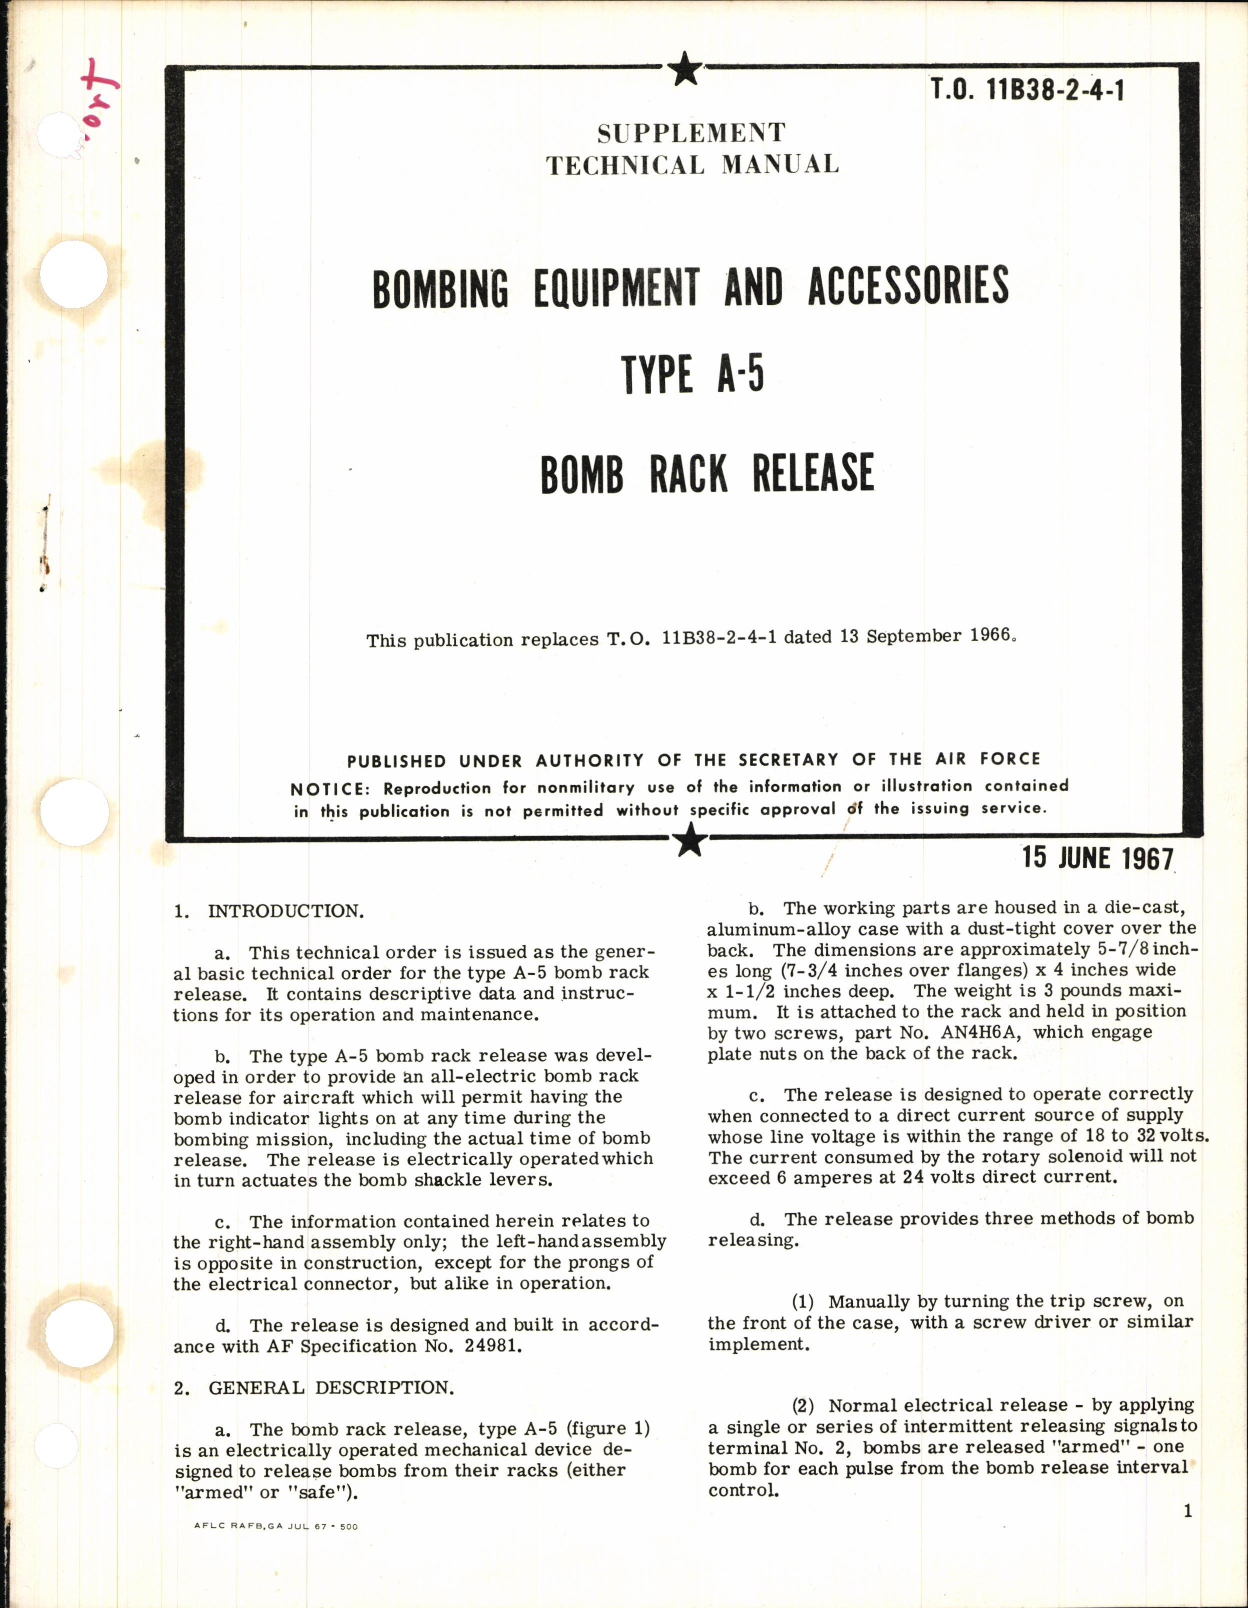 Sample page 1 from AirCorps Library document: Bombing Equipment and Accessories Type A-5 Bomb Rack Release 